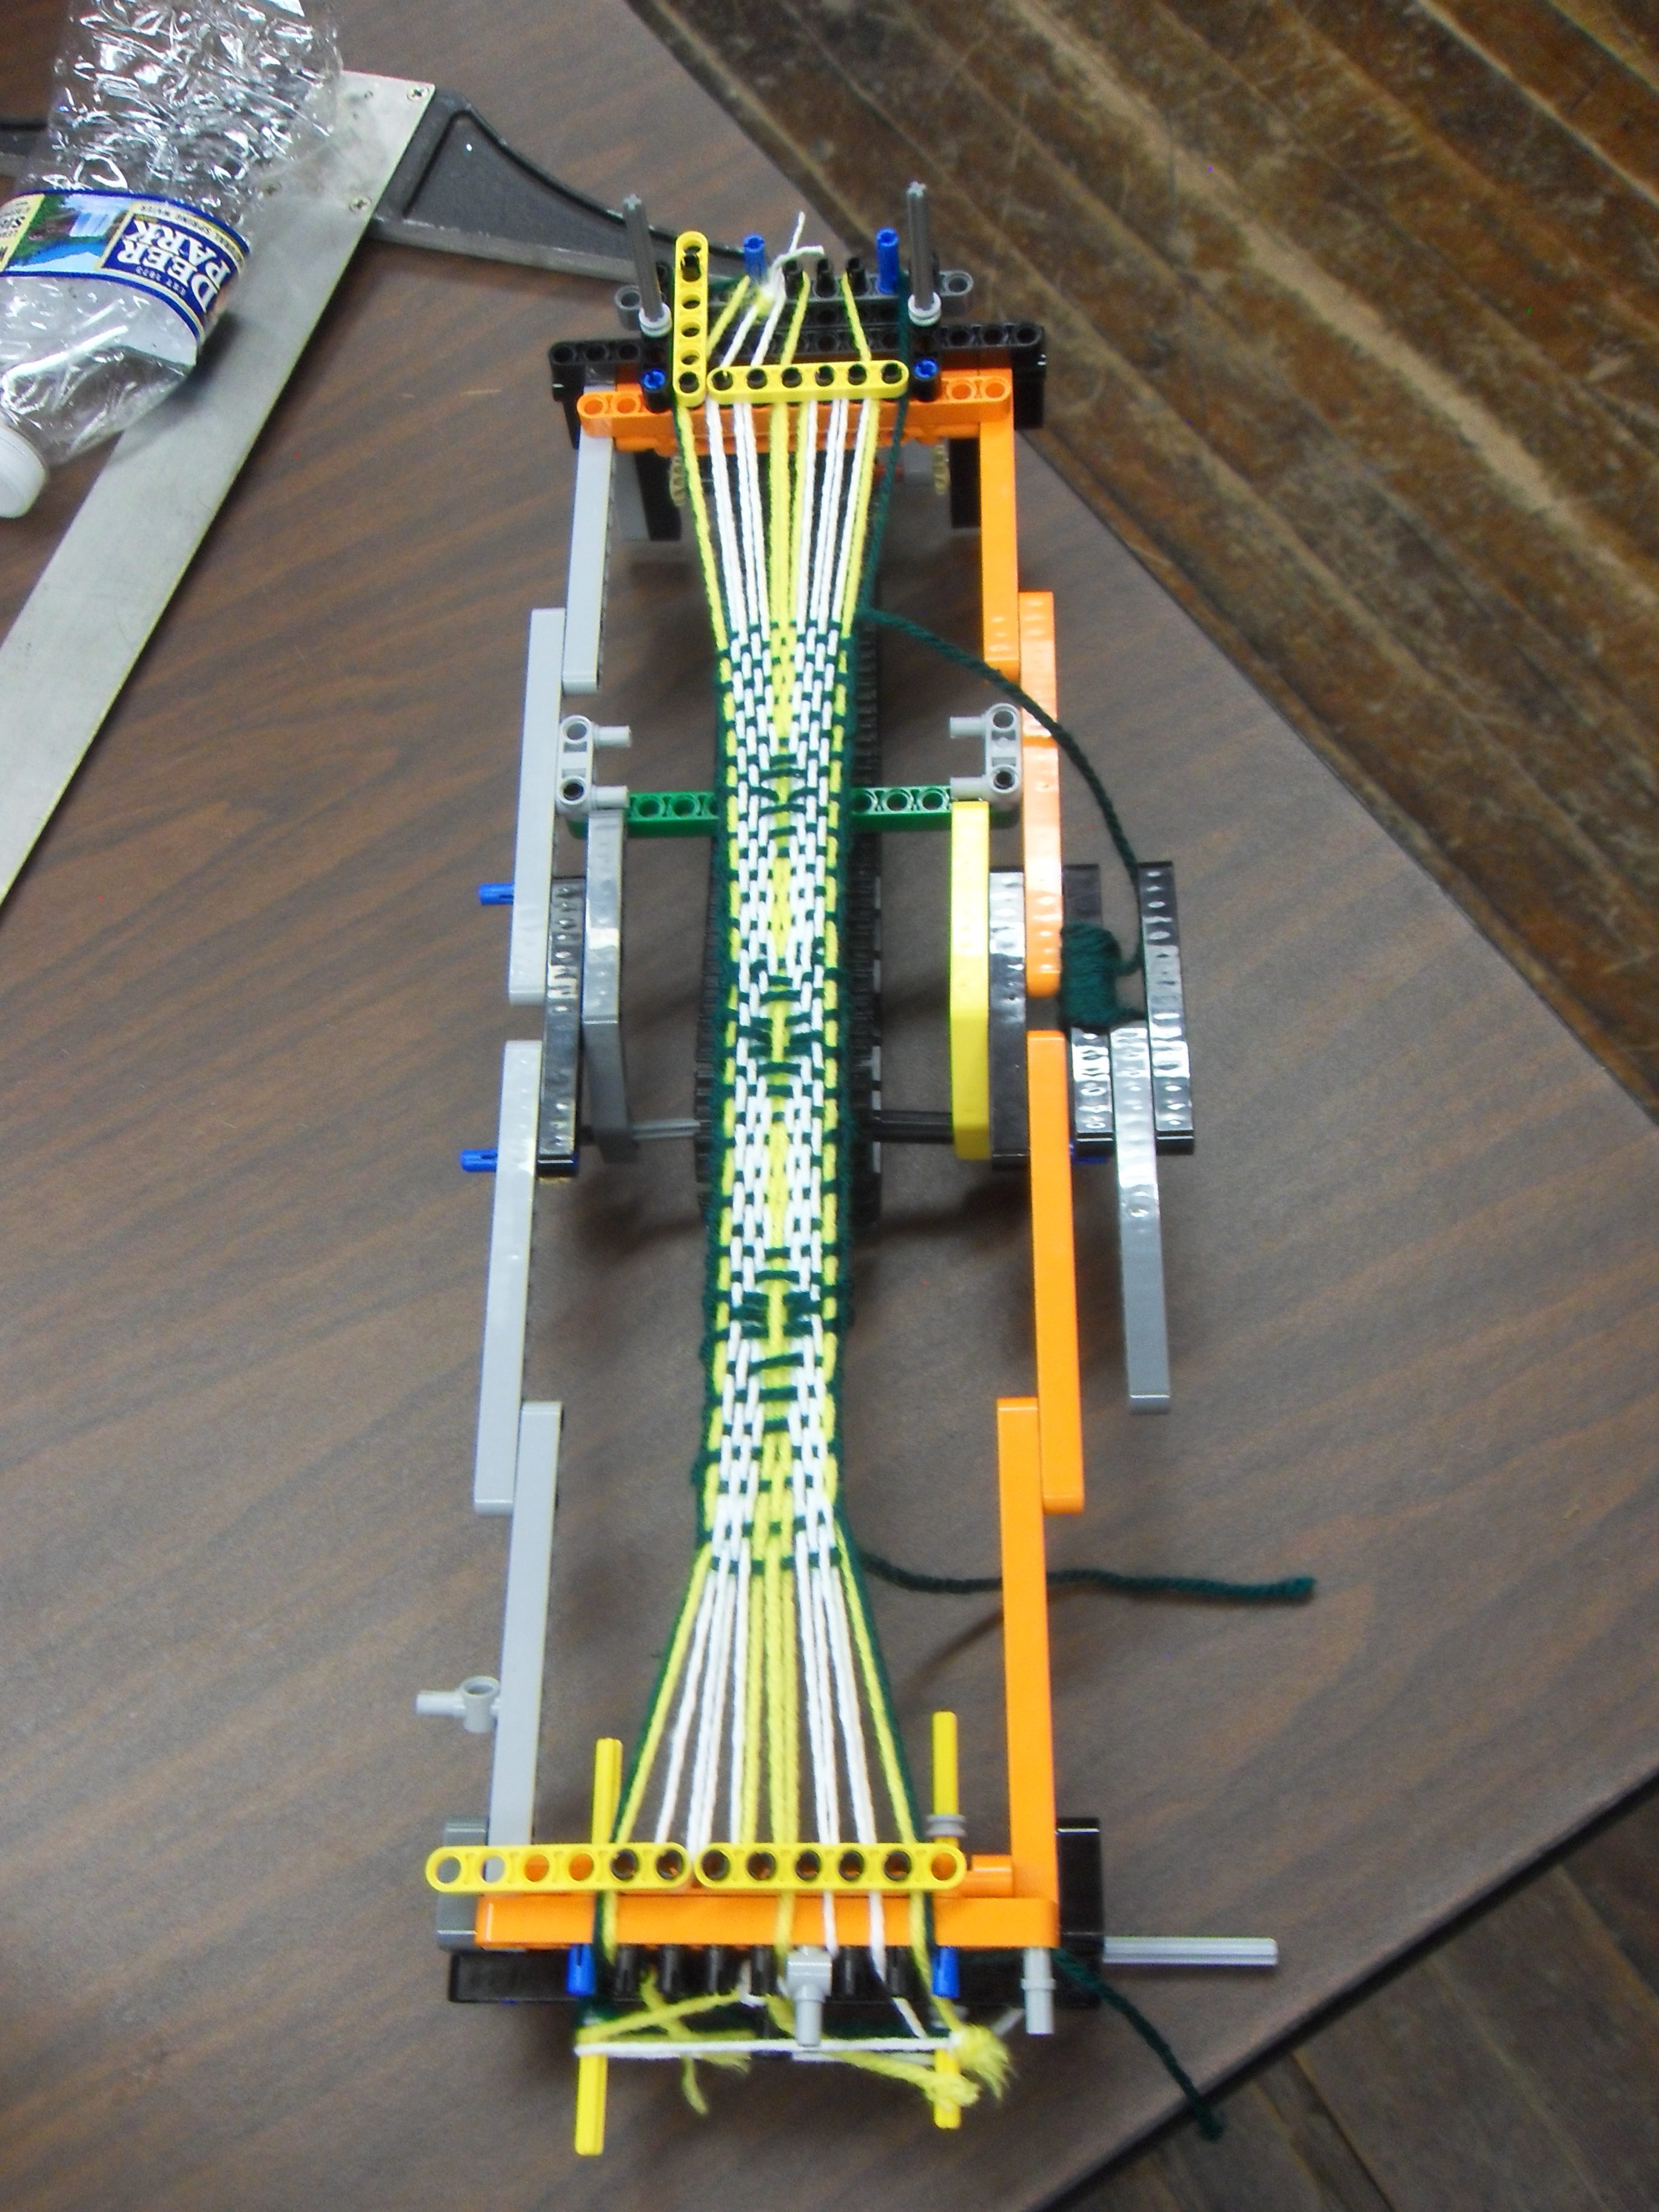 Inkle Loom made of Legos by Martin Meyer